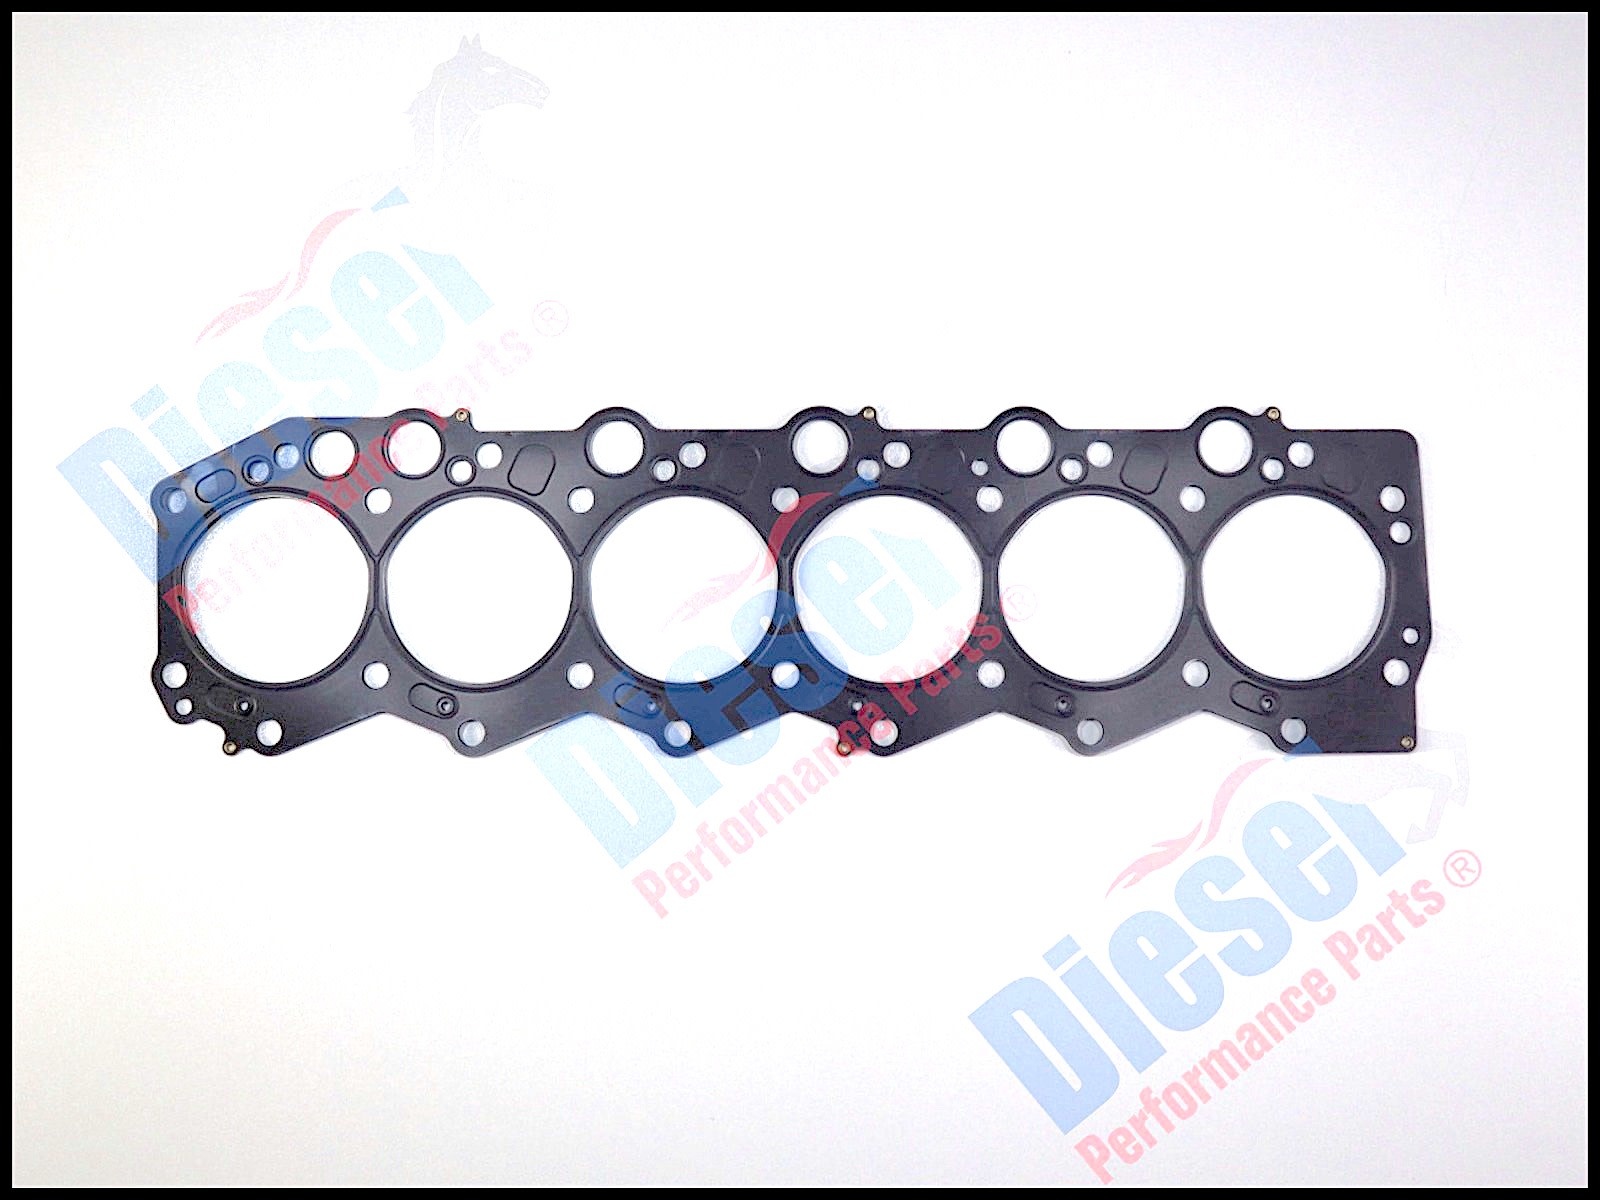 Gr. 5 1HZ, 1HDT Performance Head Gasket - Toyota 11115-17010-05 - Made in USA